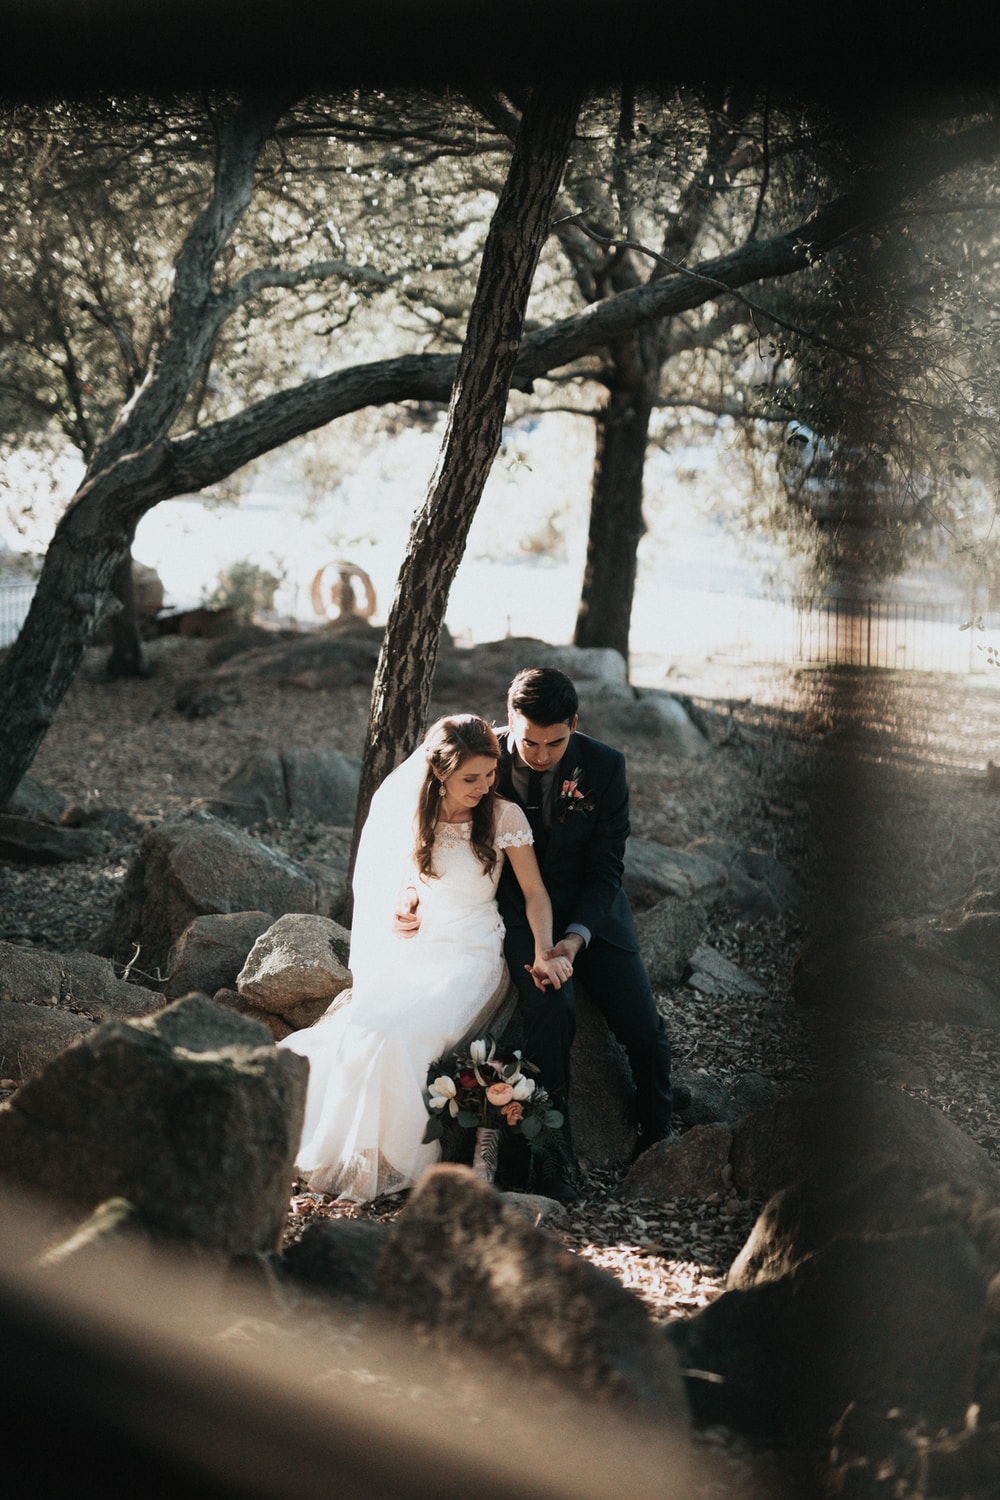 Same day edit video - groom and bride sitting on rock holding hands